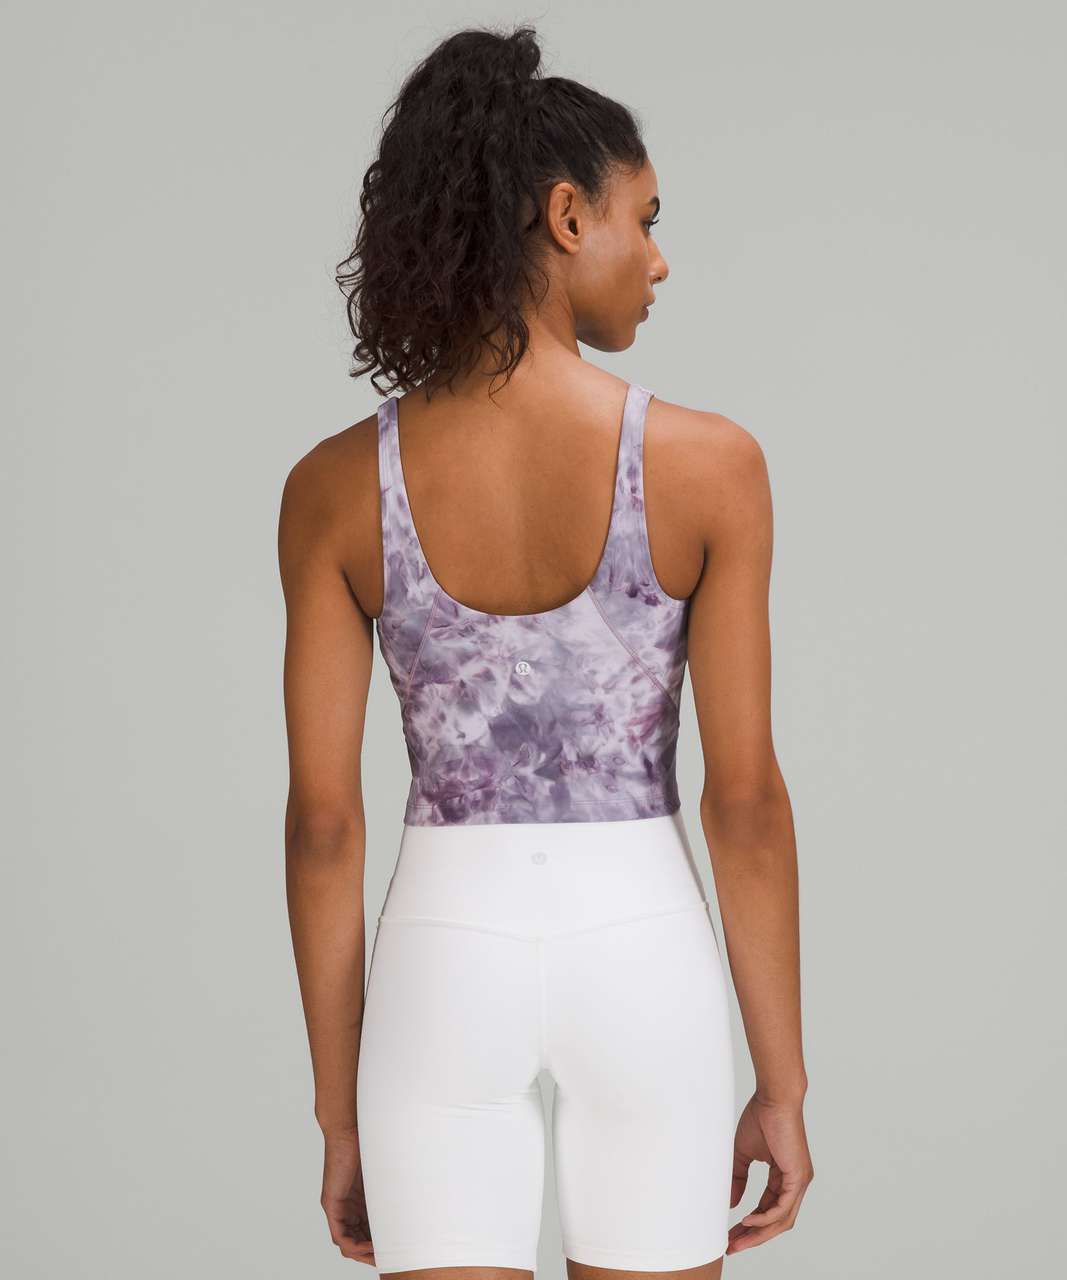 Align tank in lavender dew (8) and chambray wunder trains (4